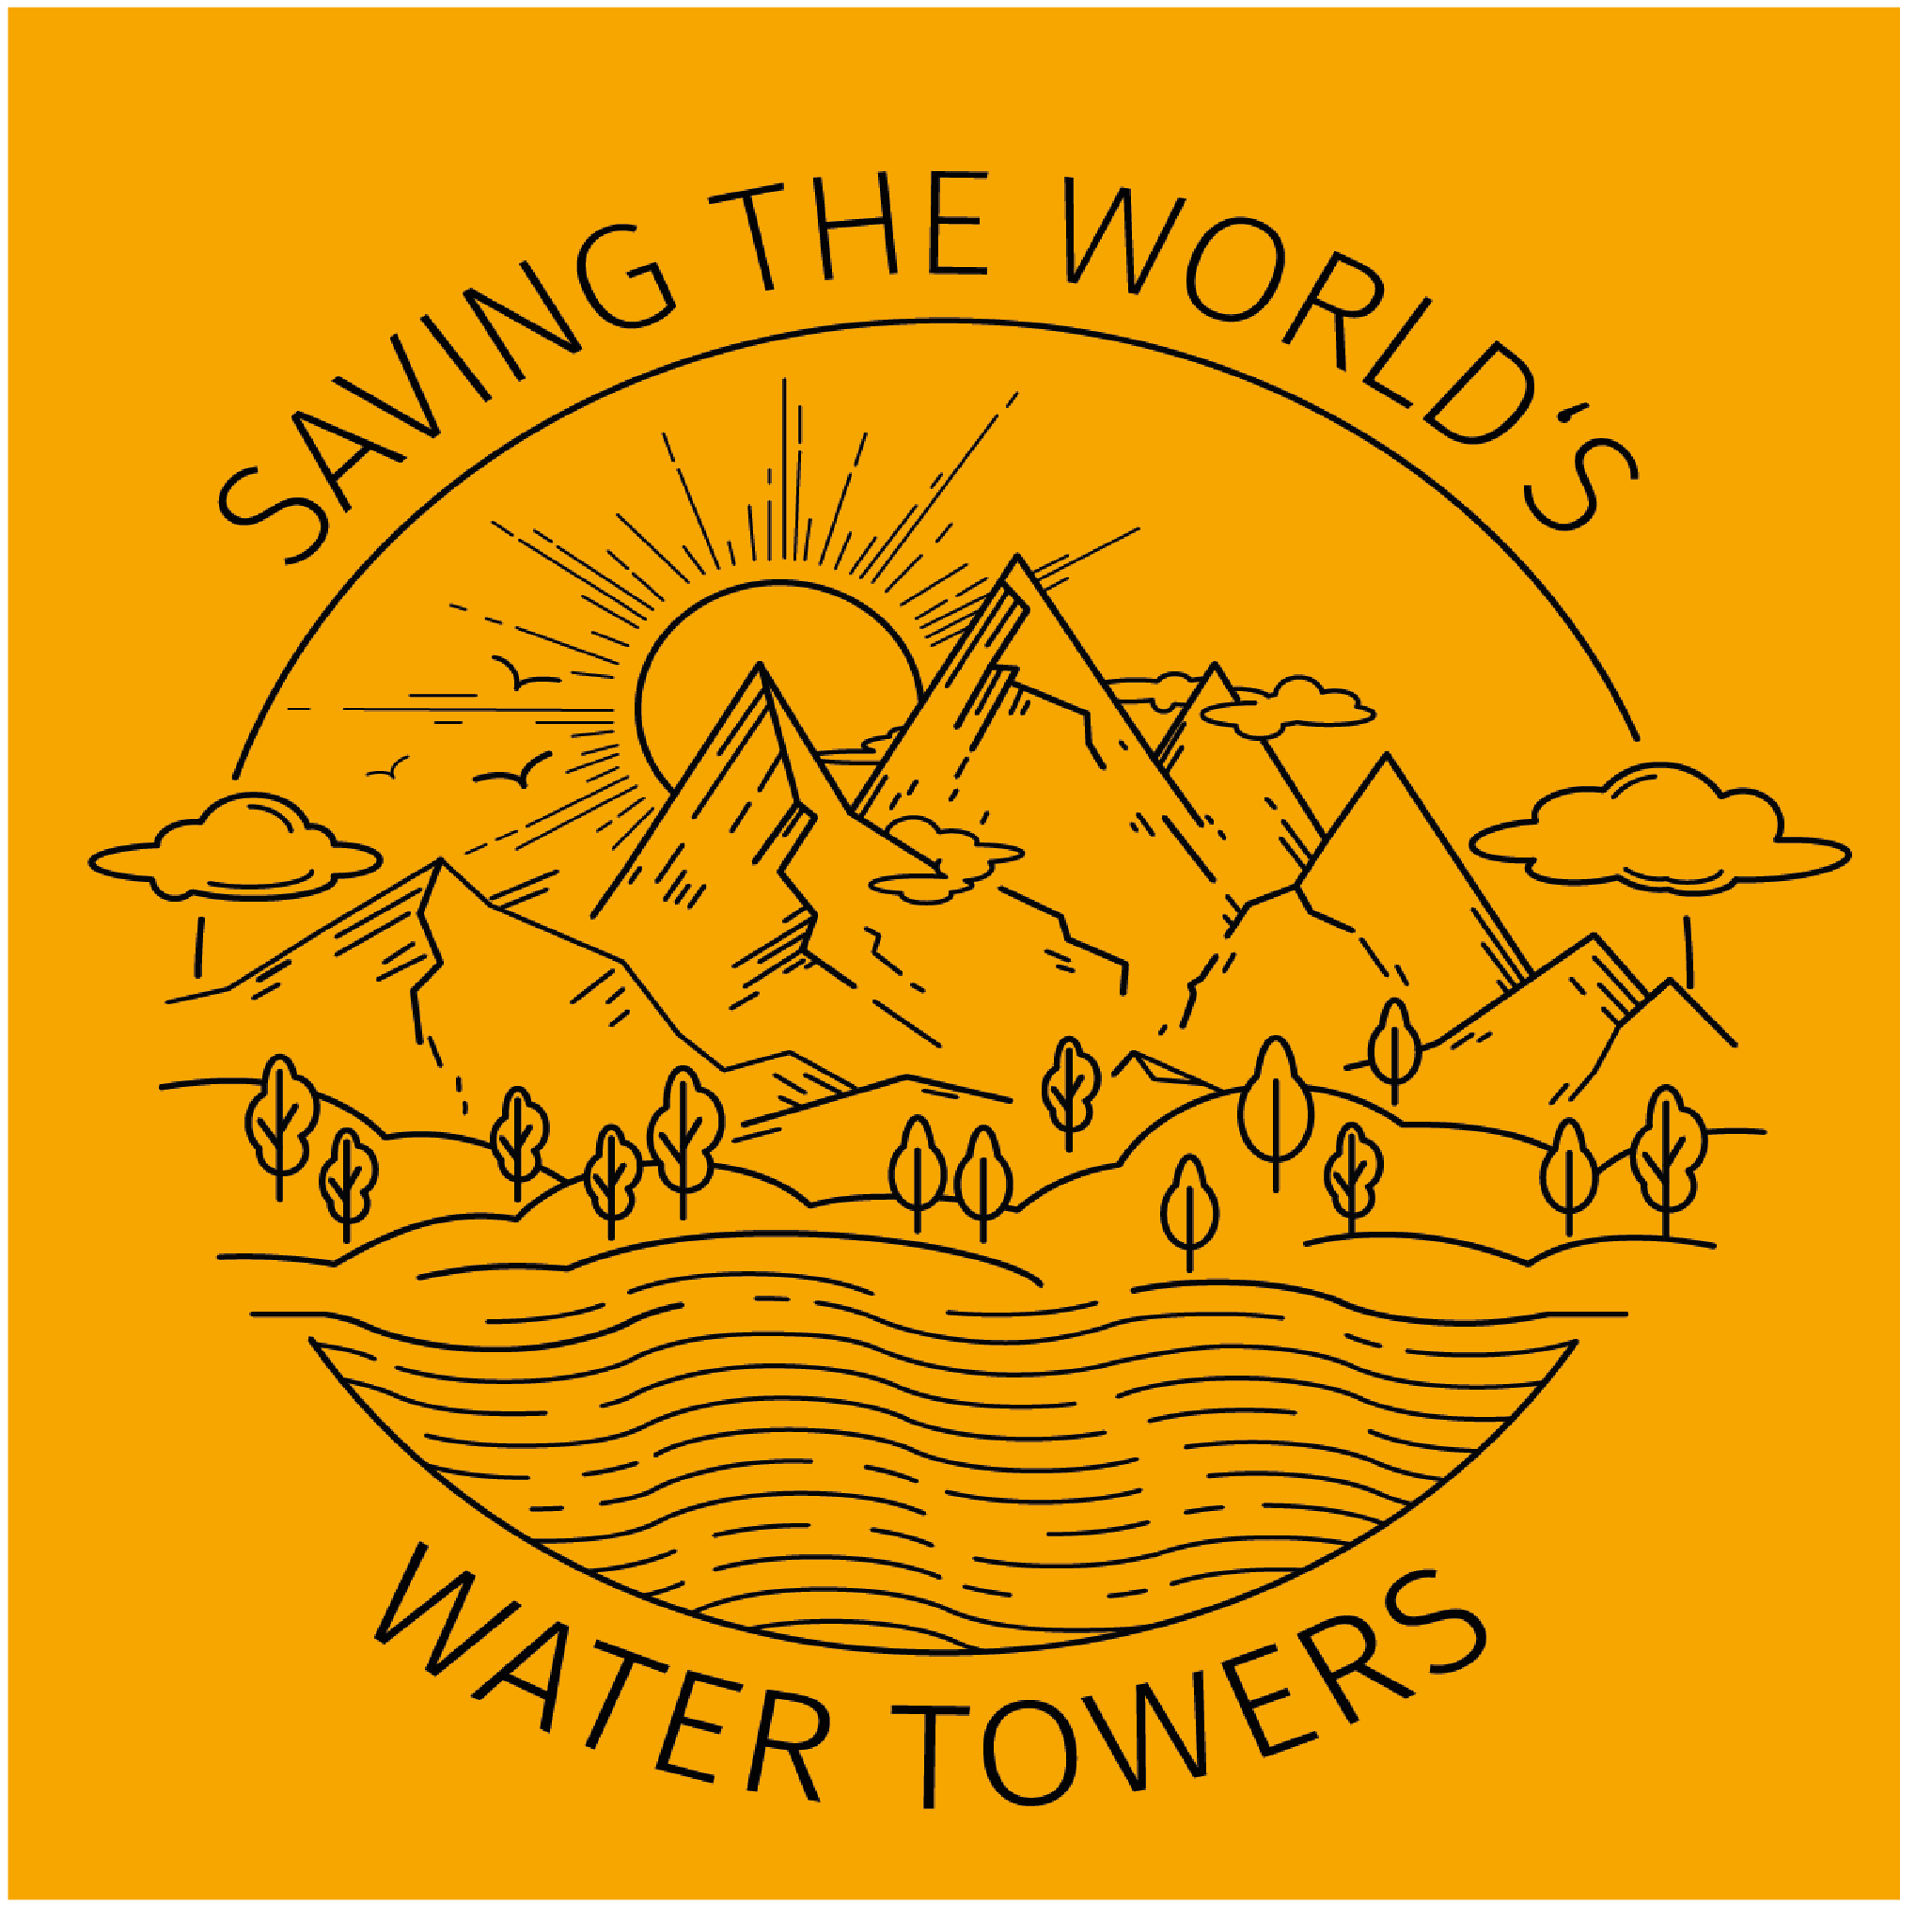 Zero Water Day Partnership, Saving the World's Water Towers Campaign